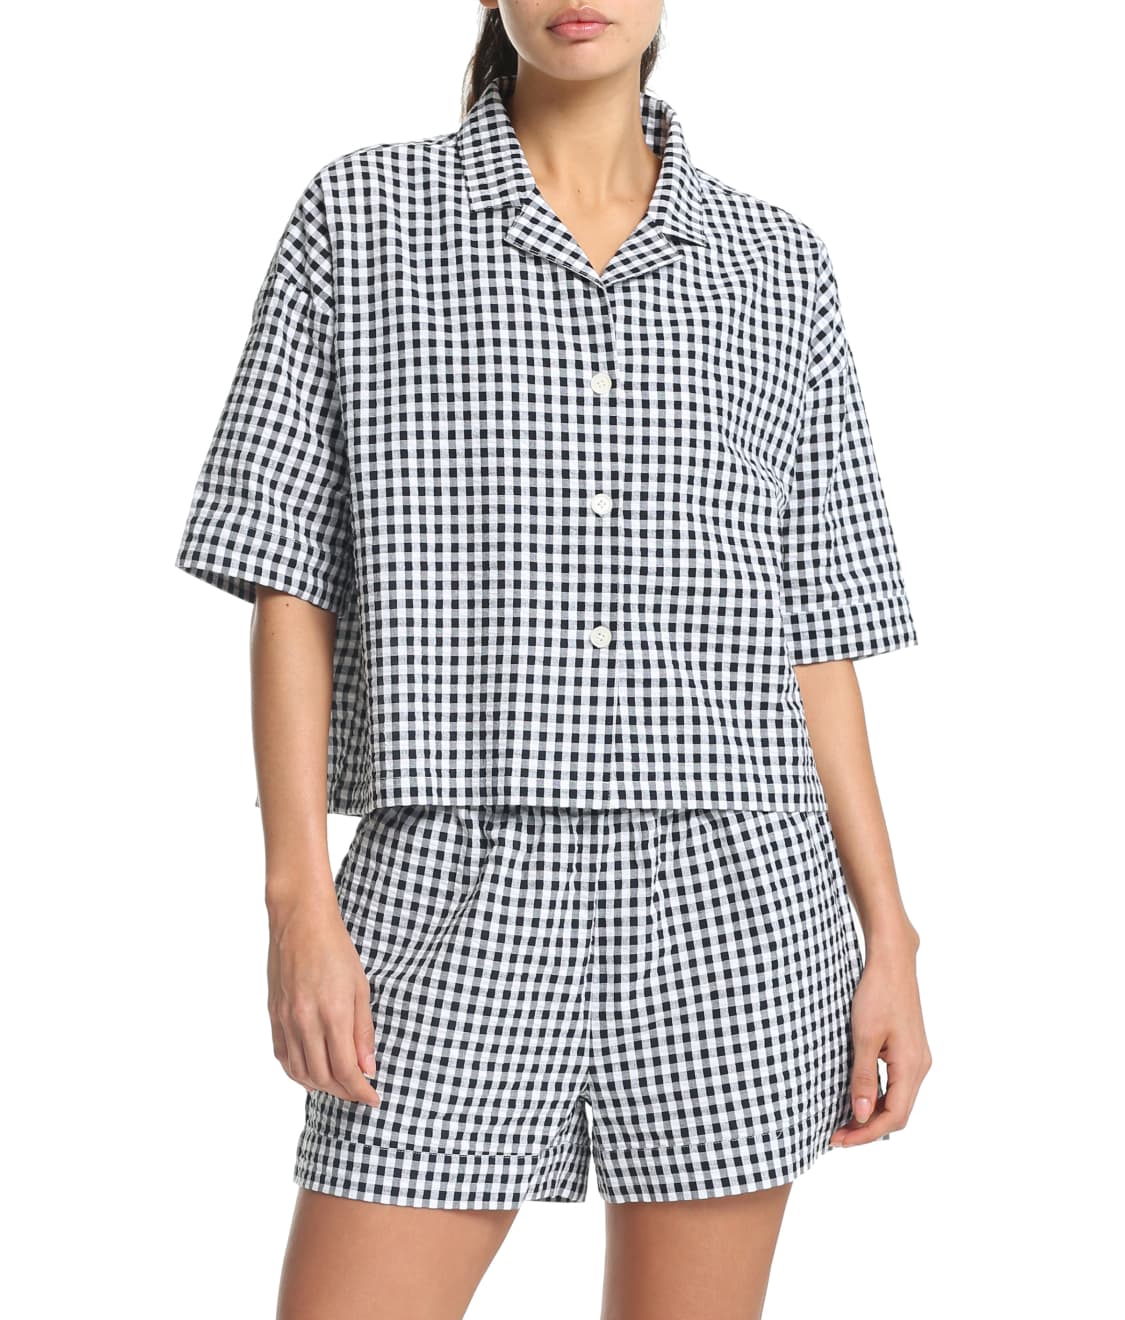 Papinelle: Gingham Woven Boxer Pajama Set 21411-1270